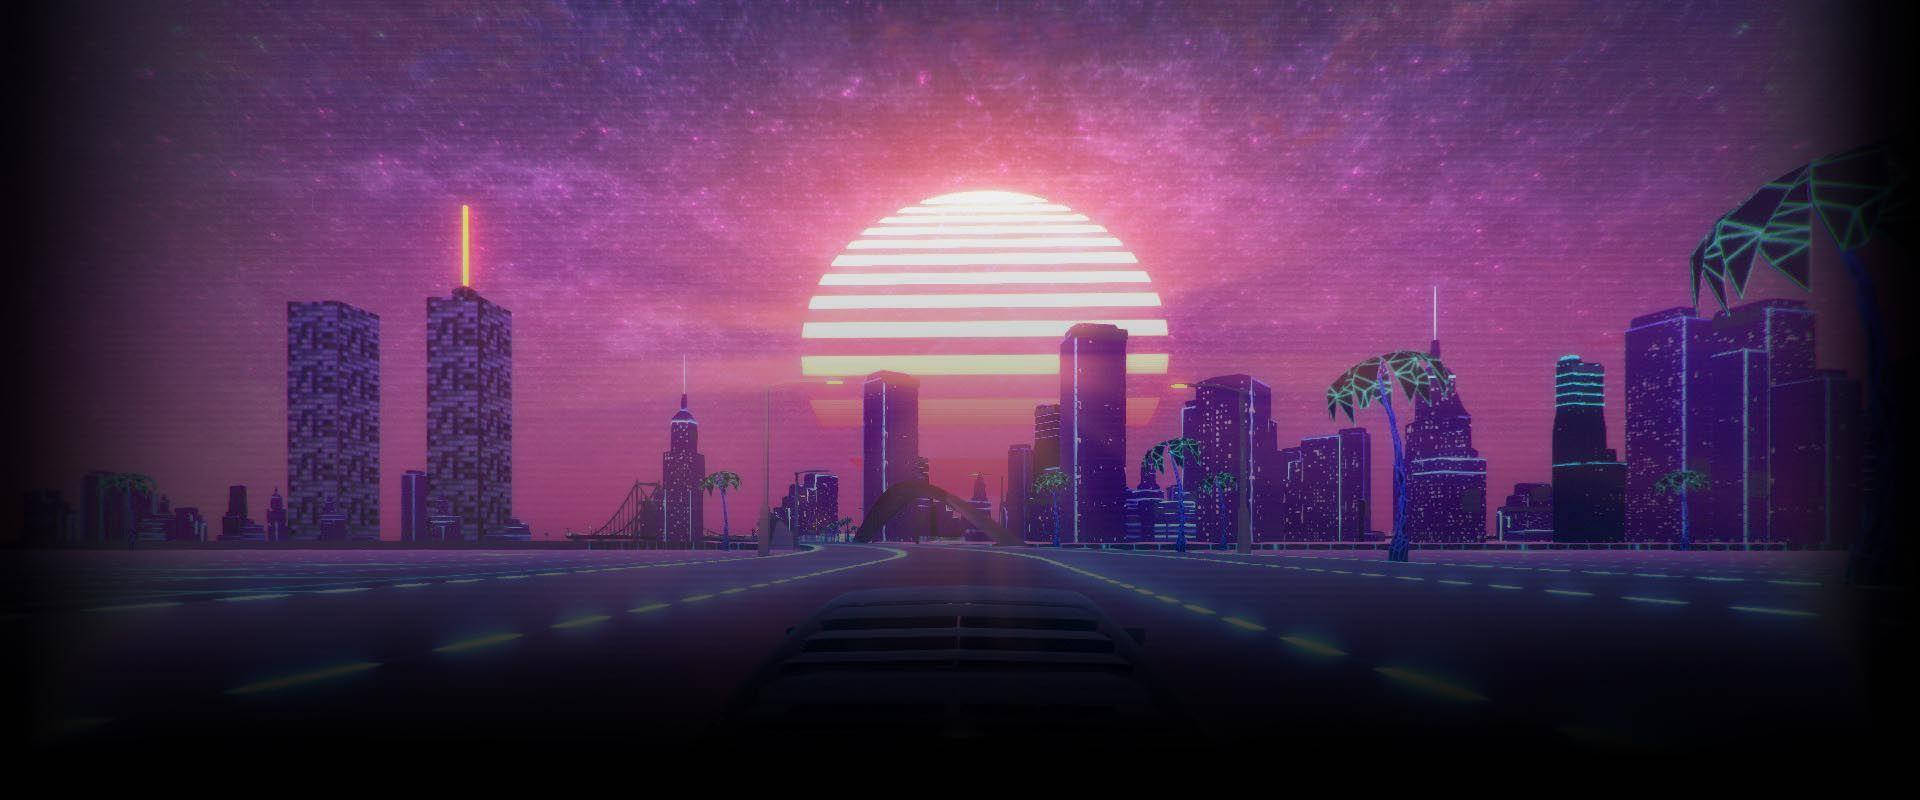 Aesthetic Profile Picture Vaporwave City Sunset